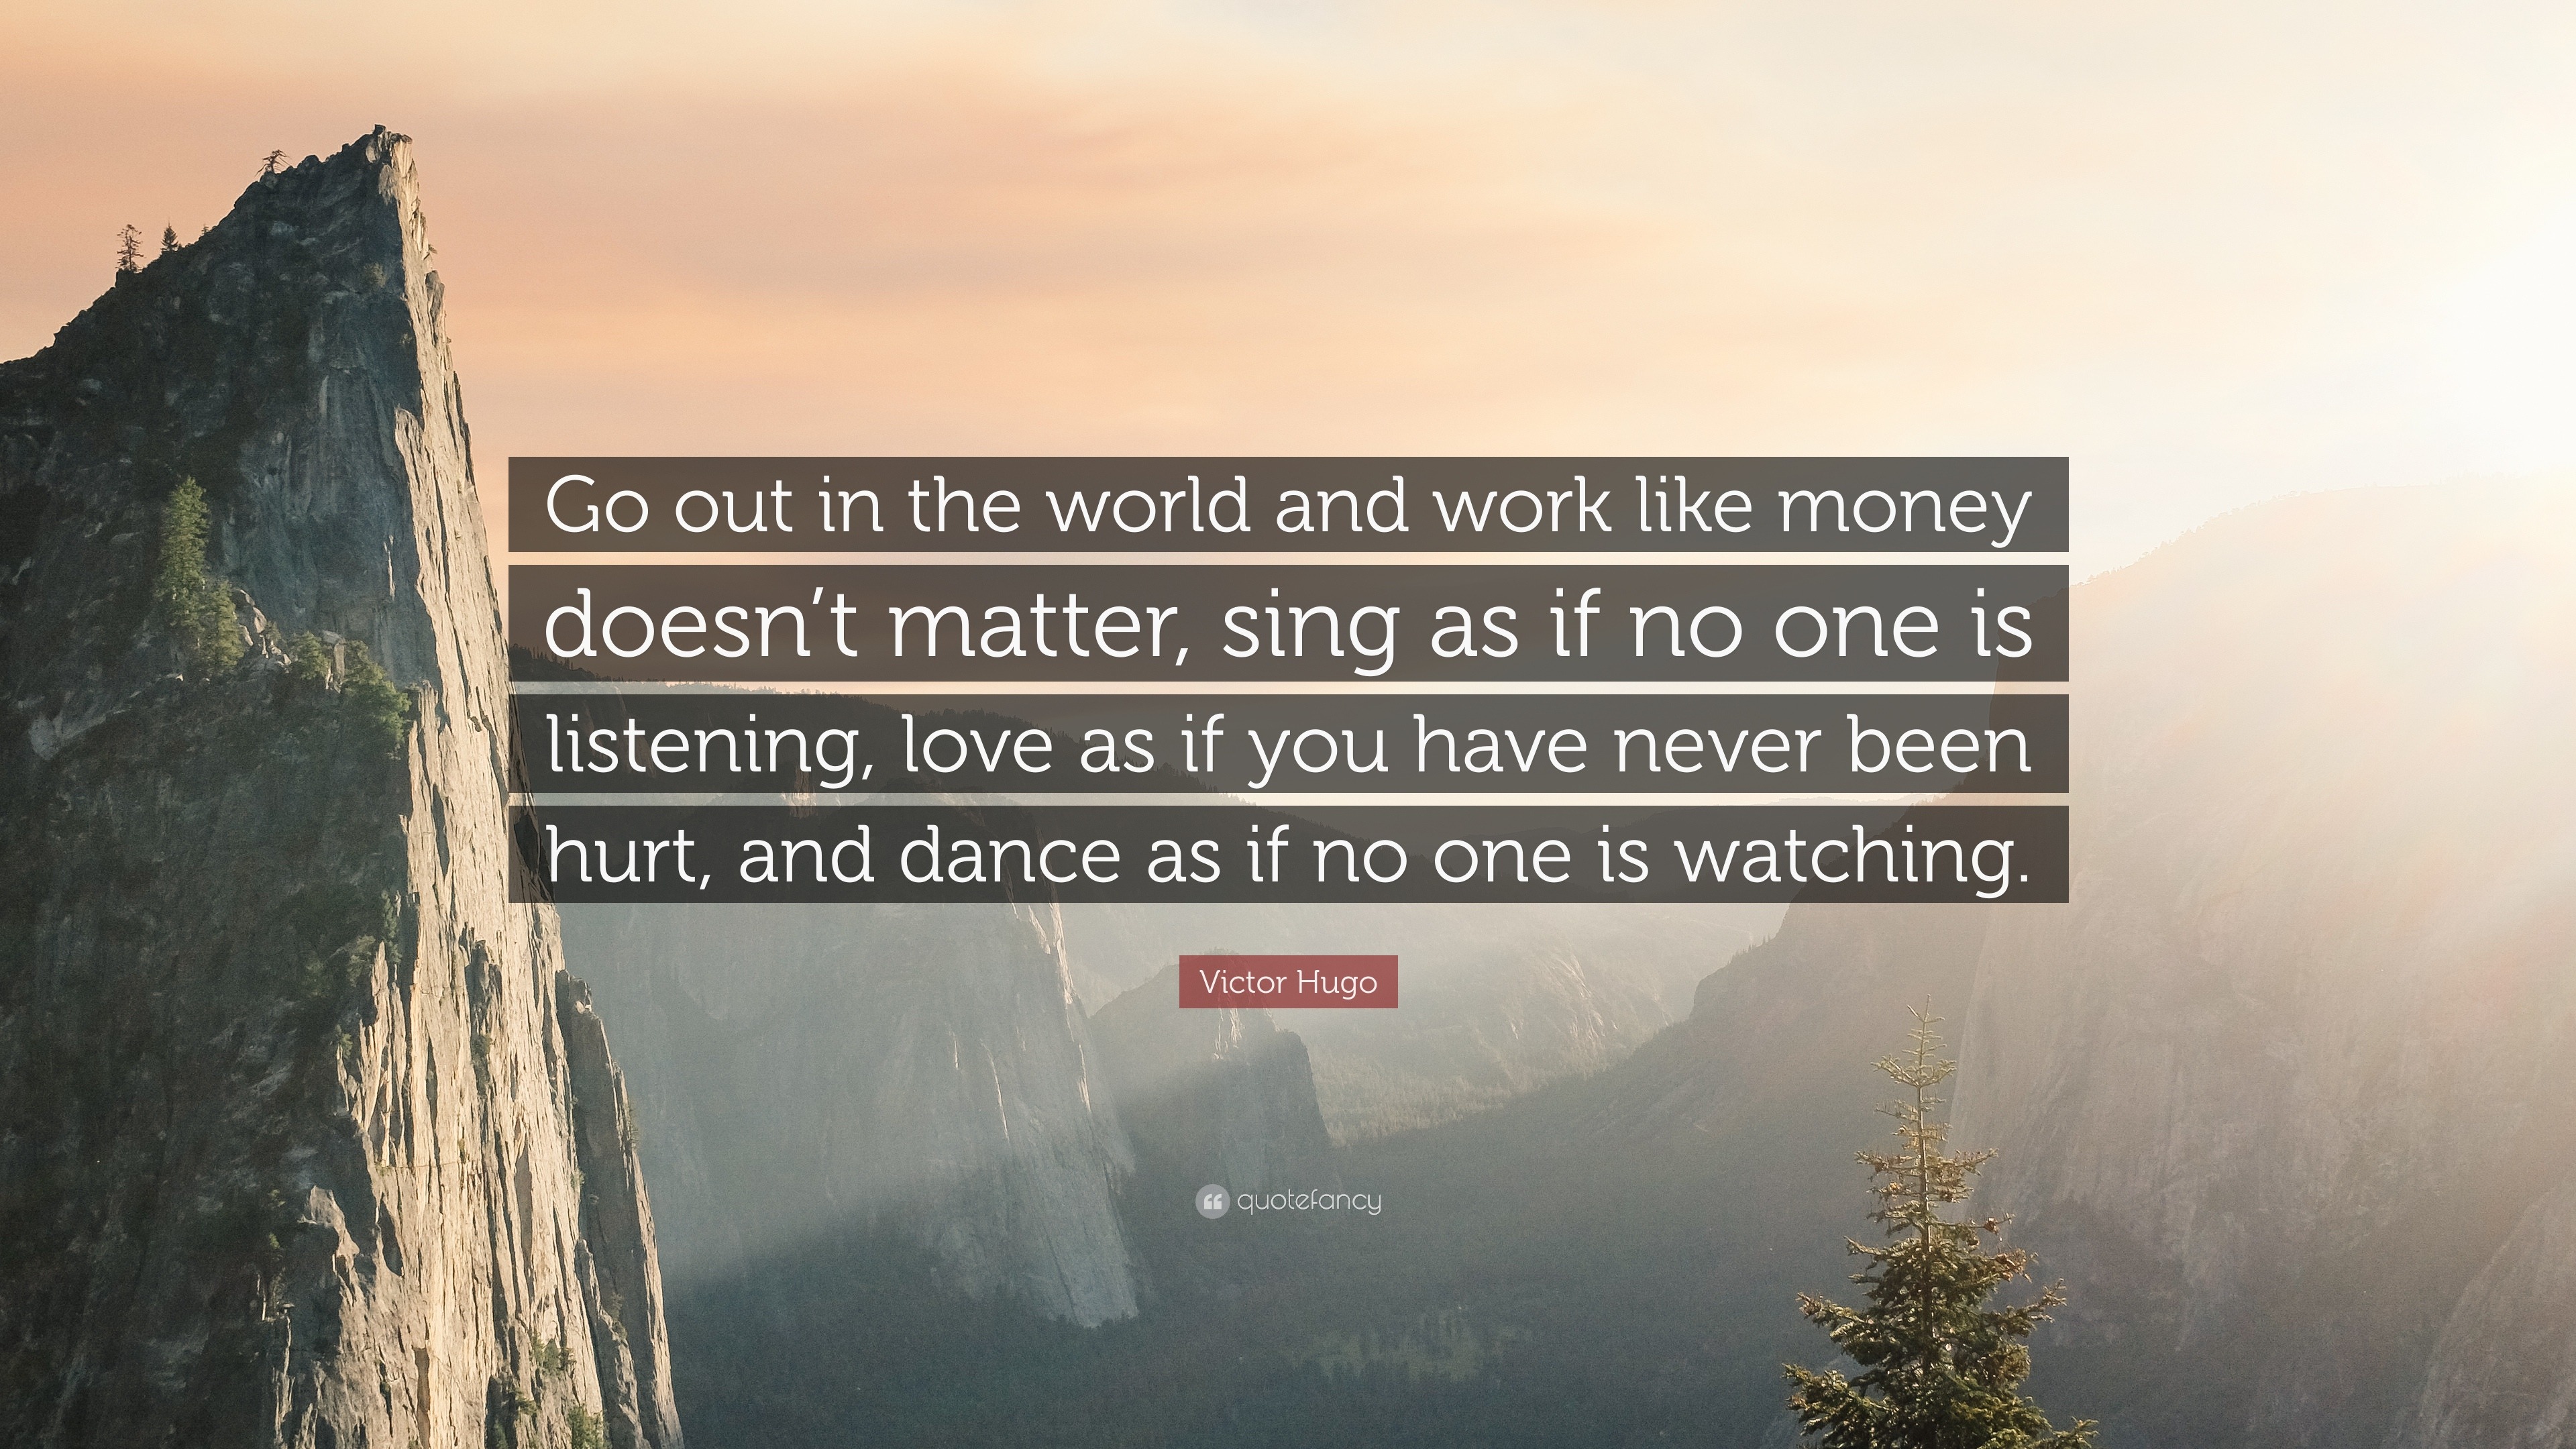 Victor Hugo Quote “Go out in the world and work like money doesn